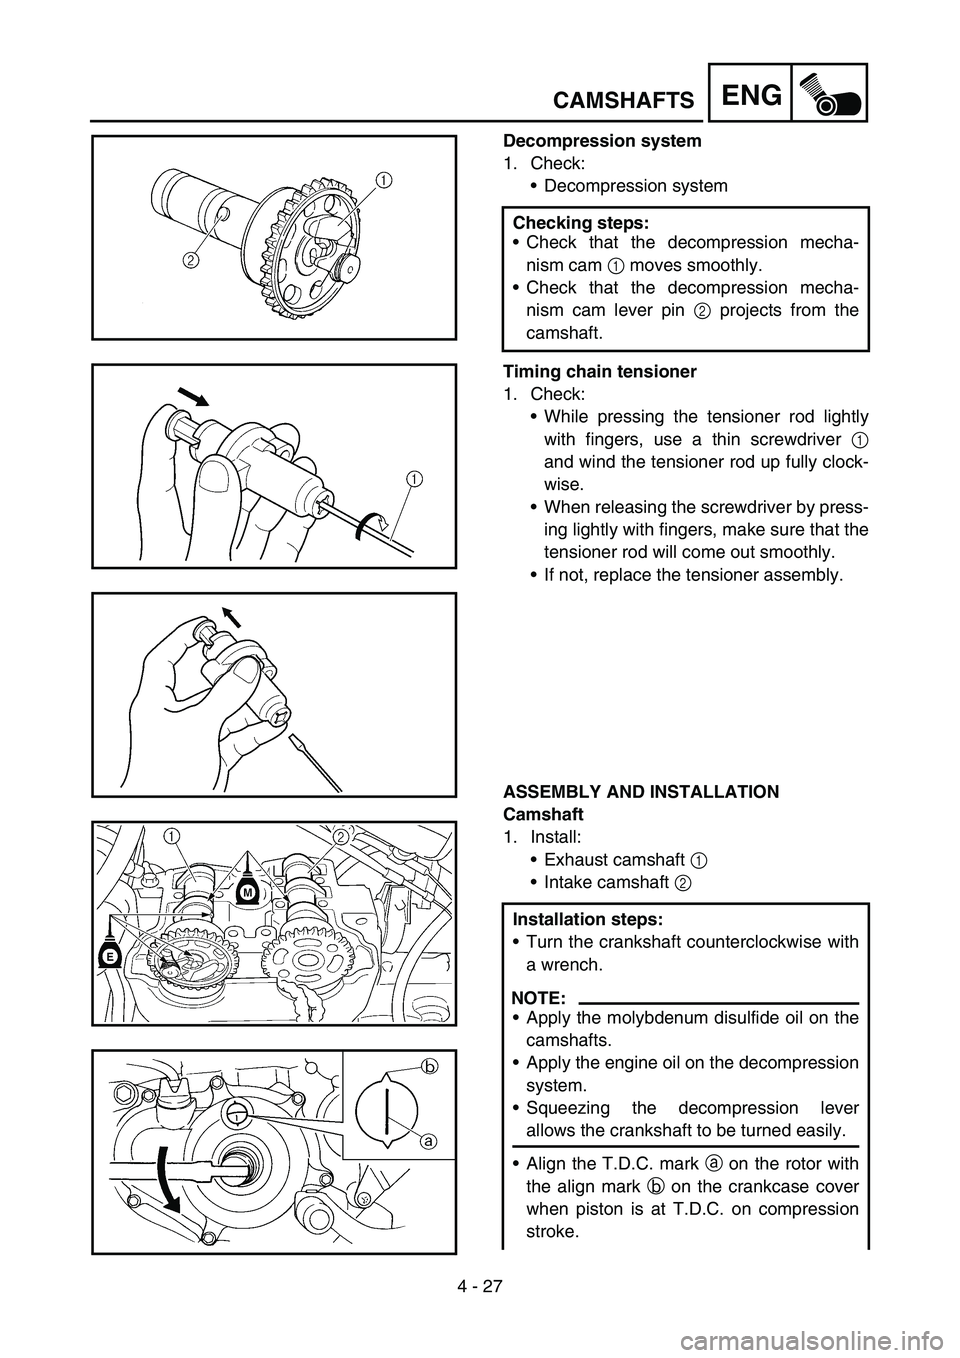 YAMAHA YZ250F 2007  Owners Manual 4 - 27
ENGCAMSHAFTS
Decompression system
1. Check:
Decompression system
Timing chain tensioner
1. Check:
While pressing the tensioner rod lightly
with fingers, use a thin screwdriver 1
and wind the 